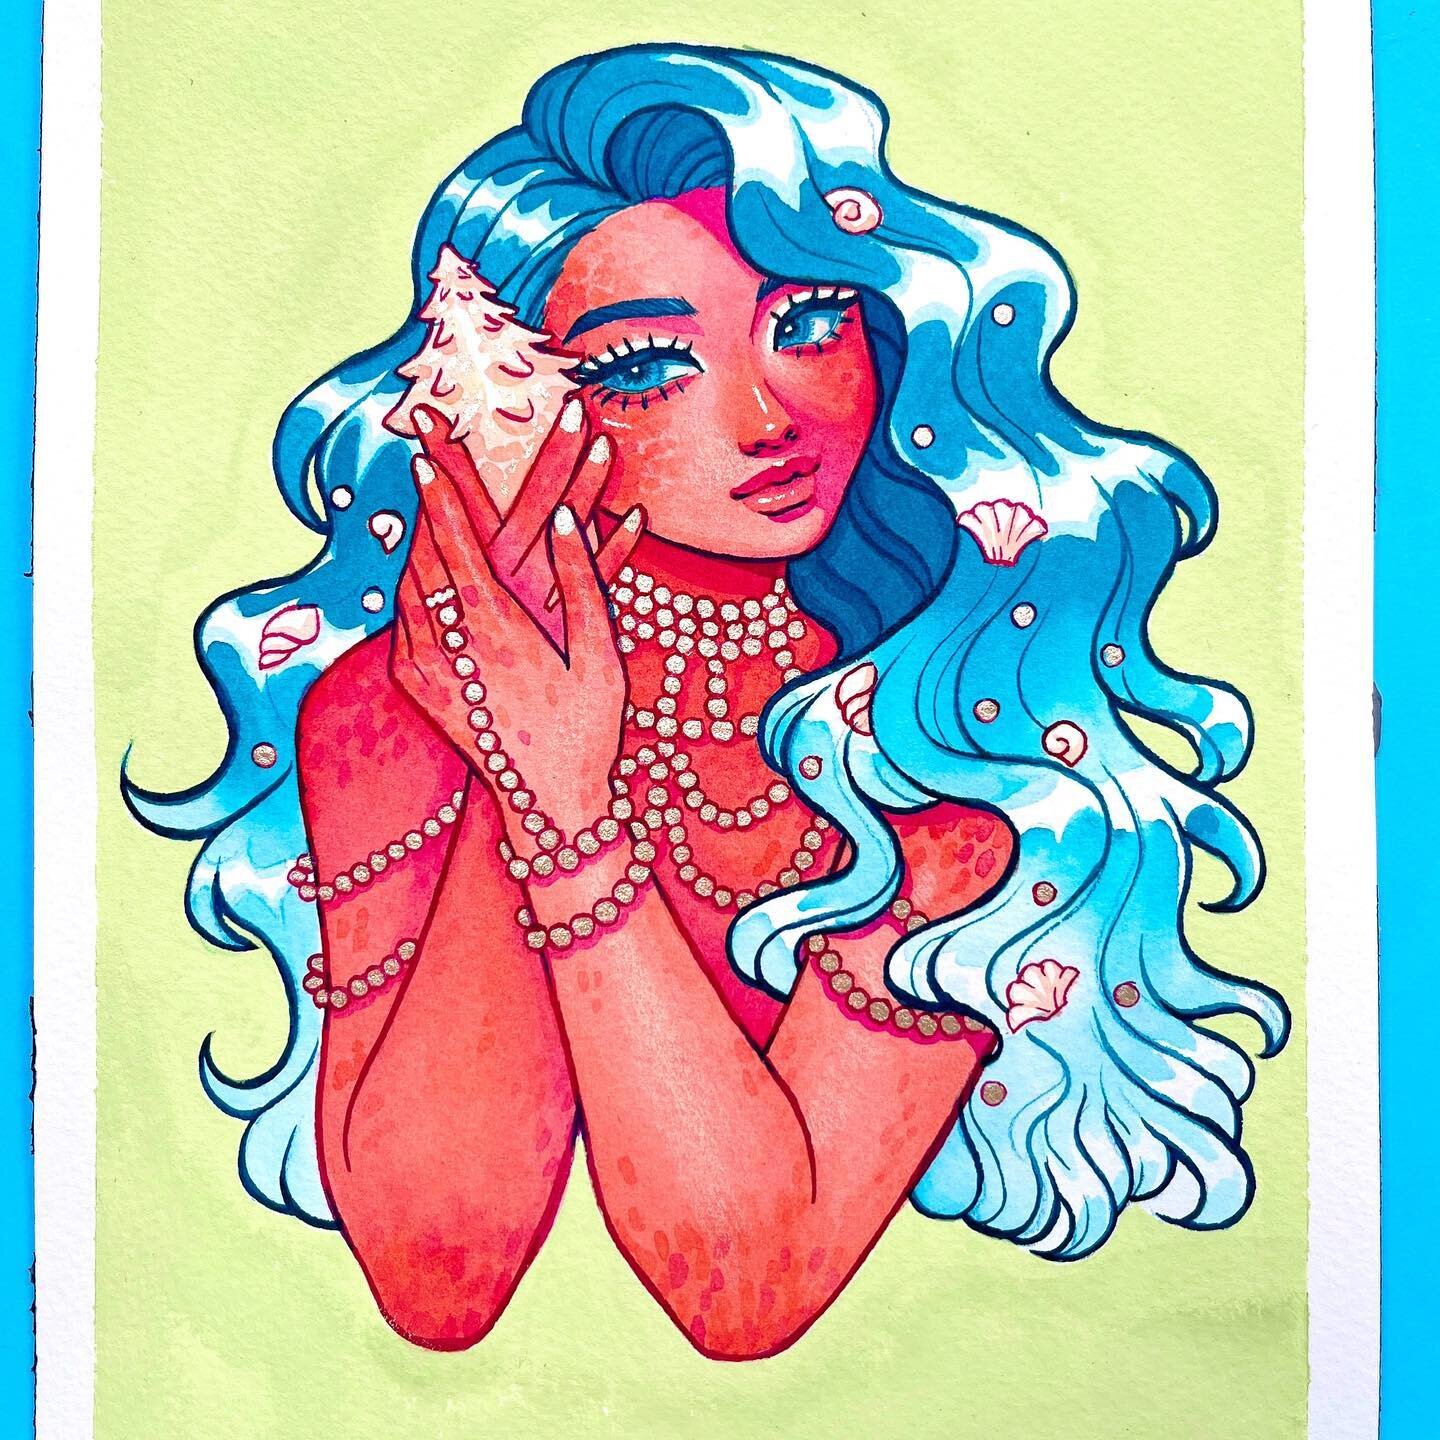 I gotta do at least a couple mermaids for #mermay 🐚 
I wanted to give her a fantasy skin tone but in hindsight she looks sun burnt 🙃
If you still think she&rsquo;s cute, she&rsquo;s the sticker reward for my Patre0n page this month! 🥹